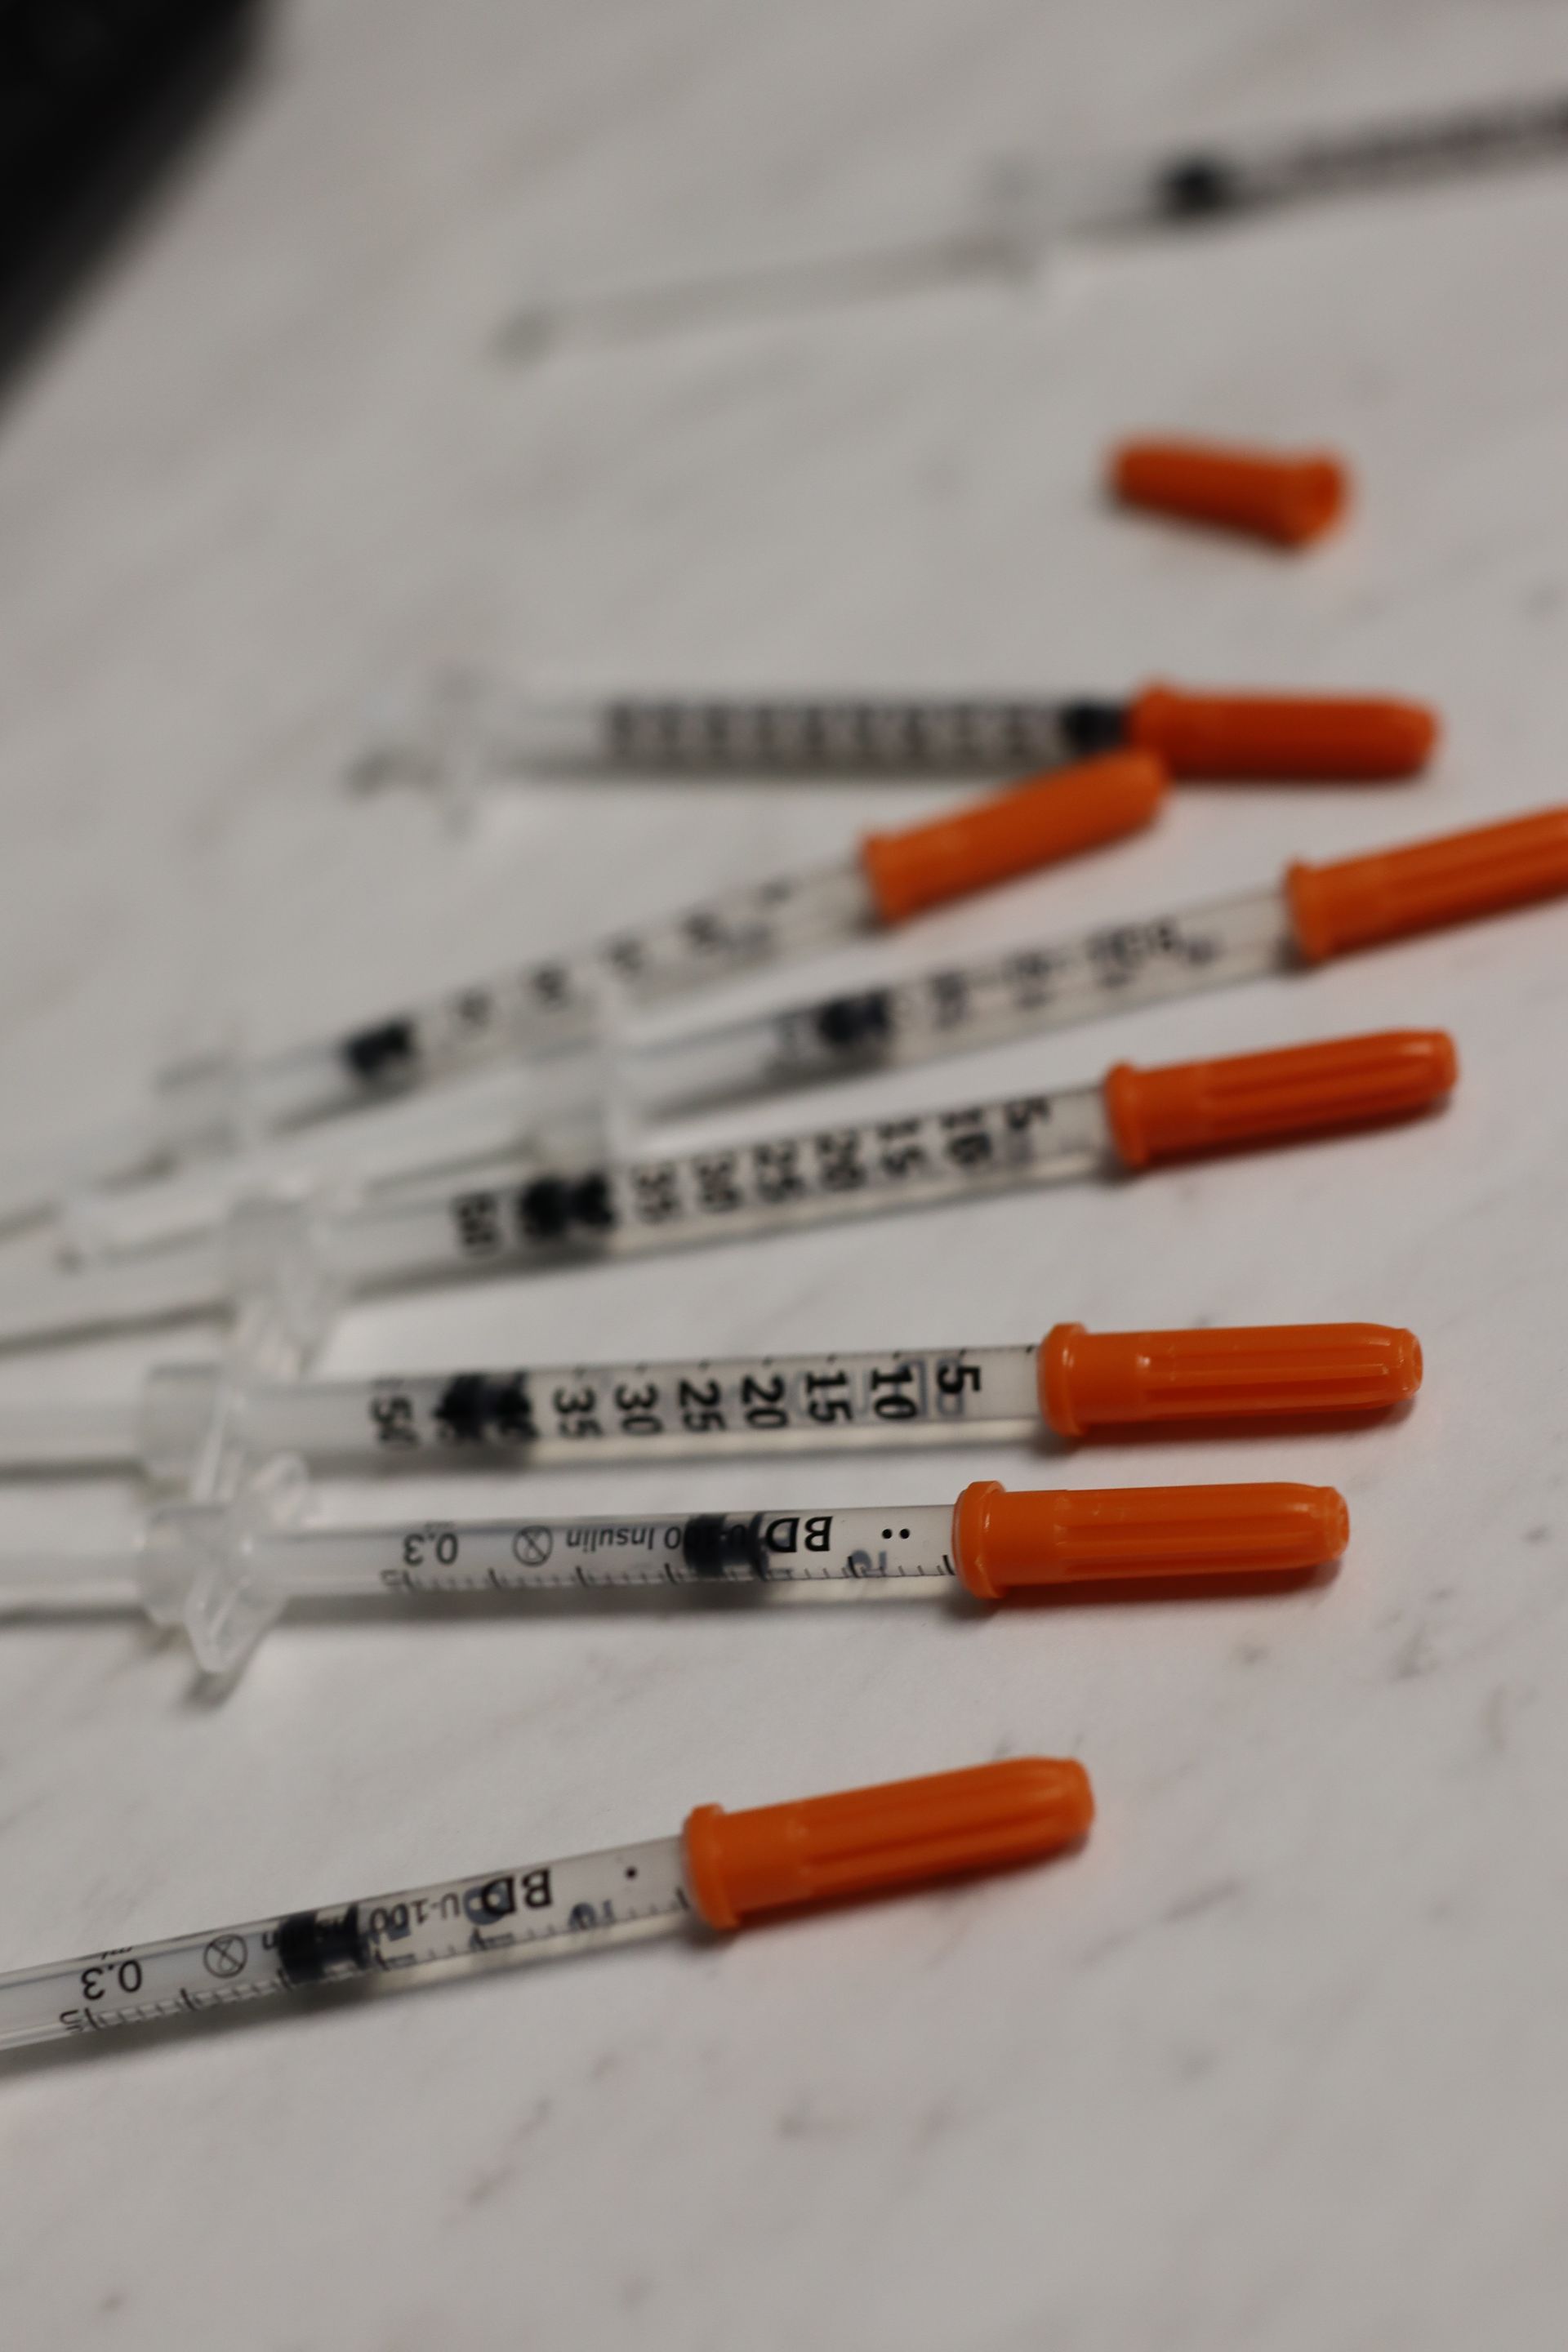 Several Botox needles neatly arranged on a sterile table, ready for use in cosmetic treatments